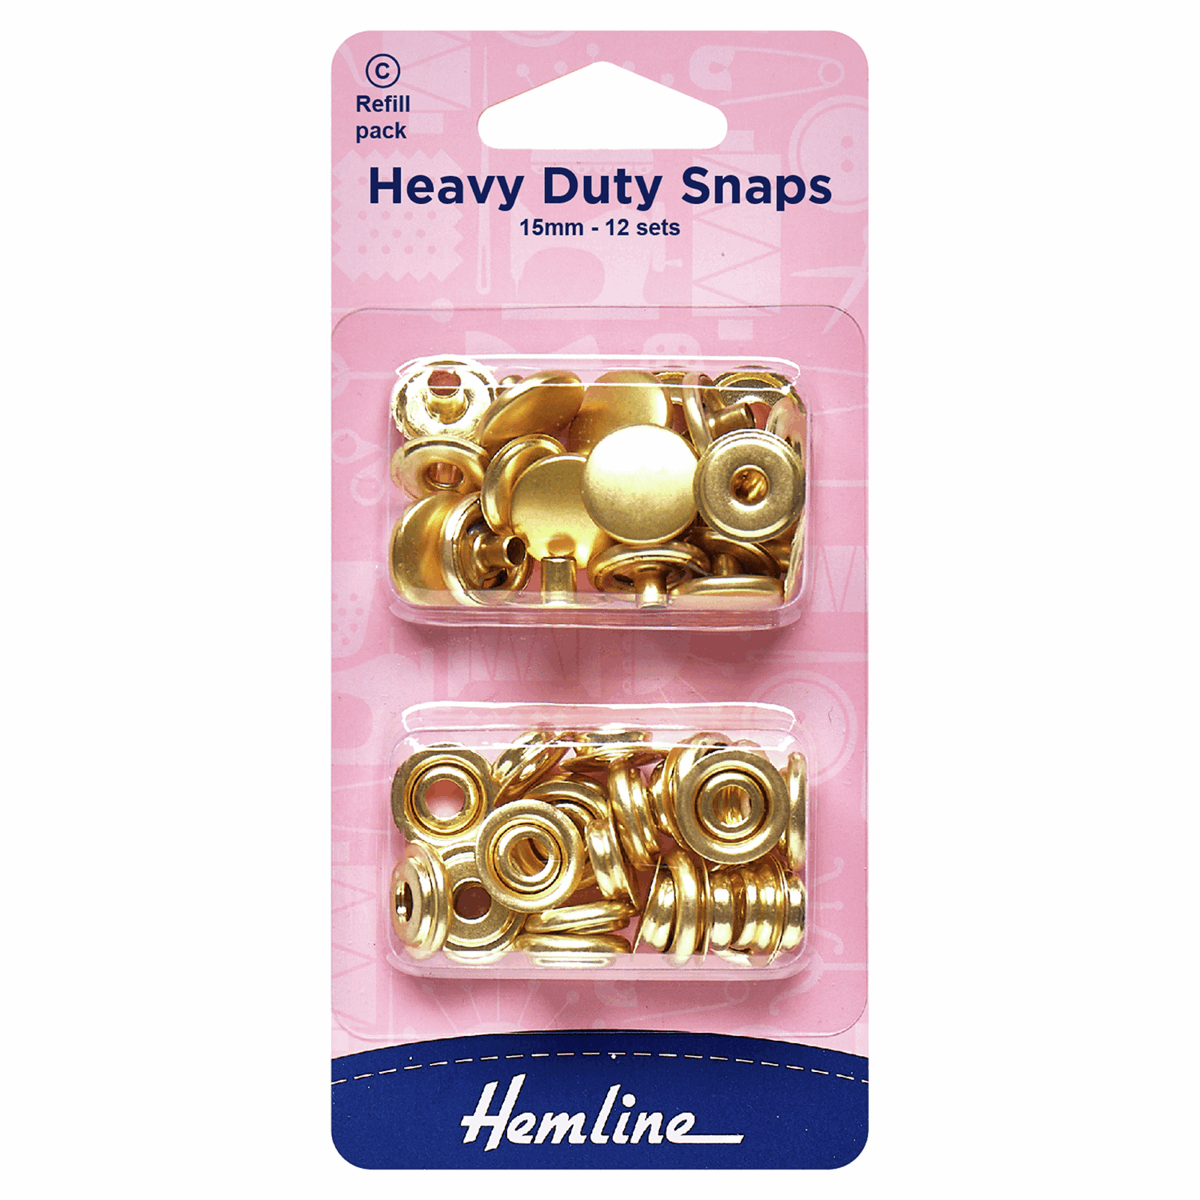 Heavy Duty Snaps: Refill Pack - Gold: 15mm